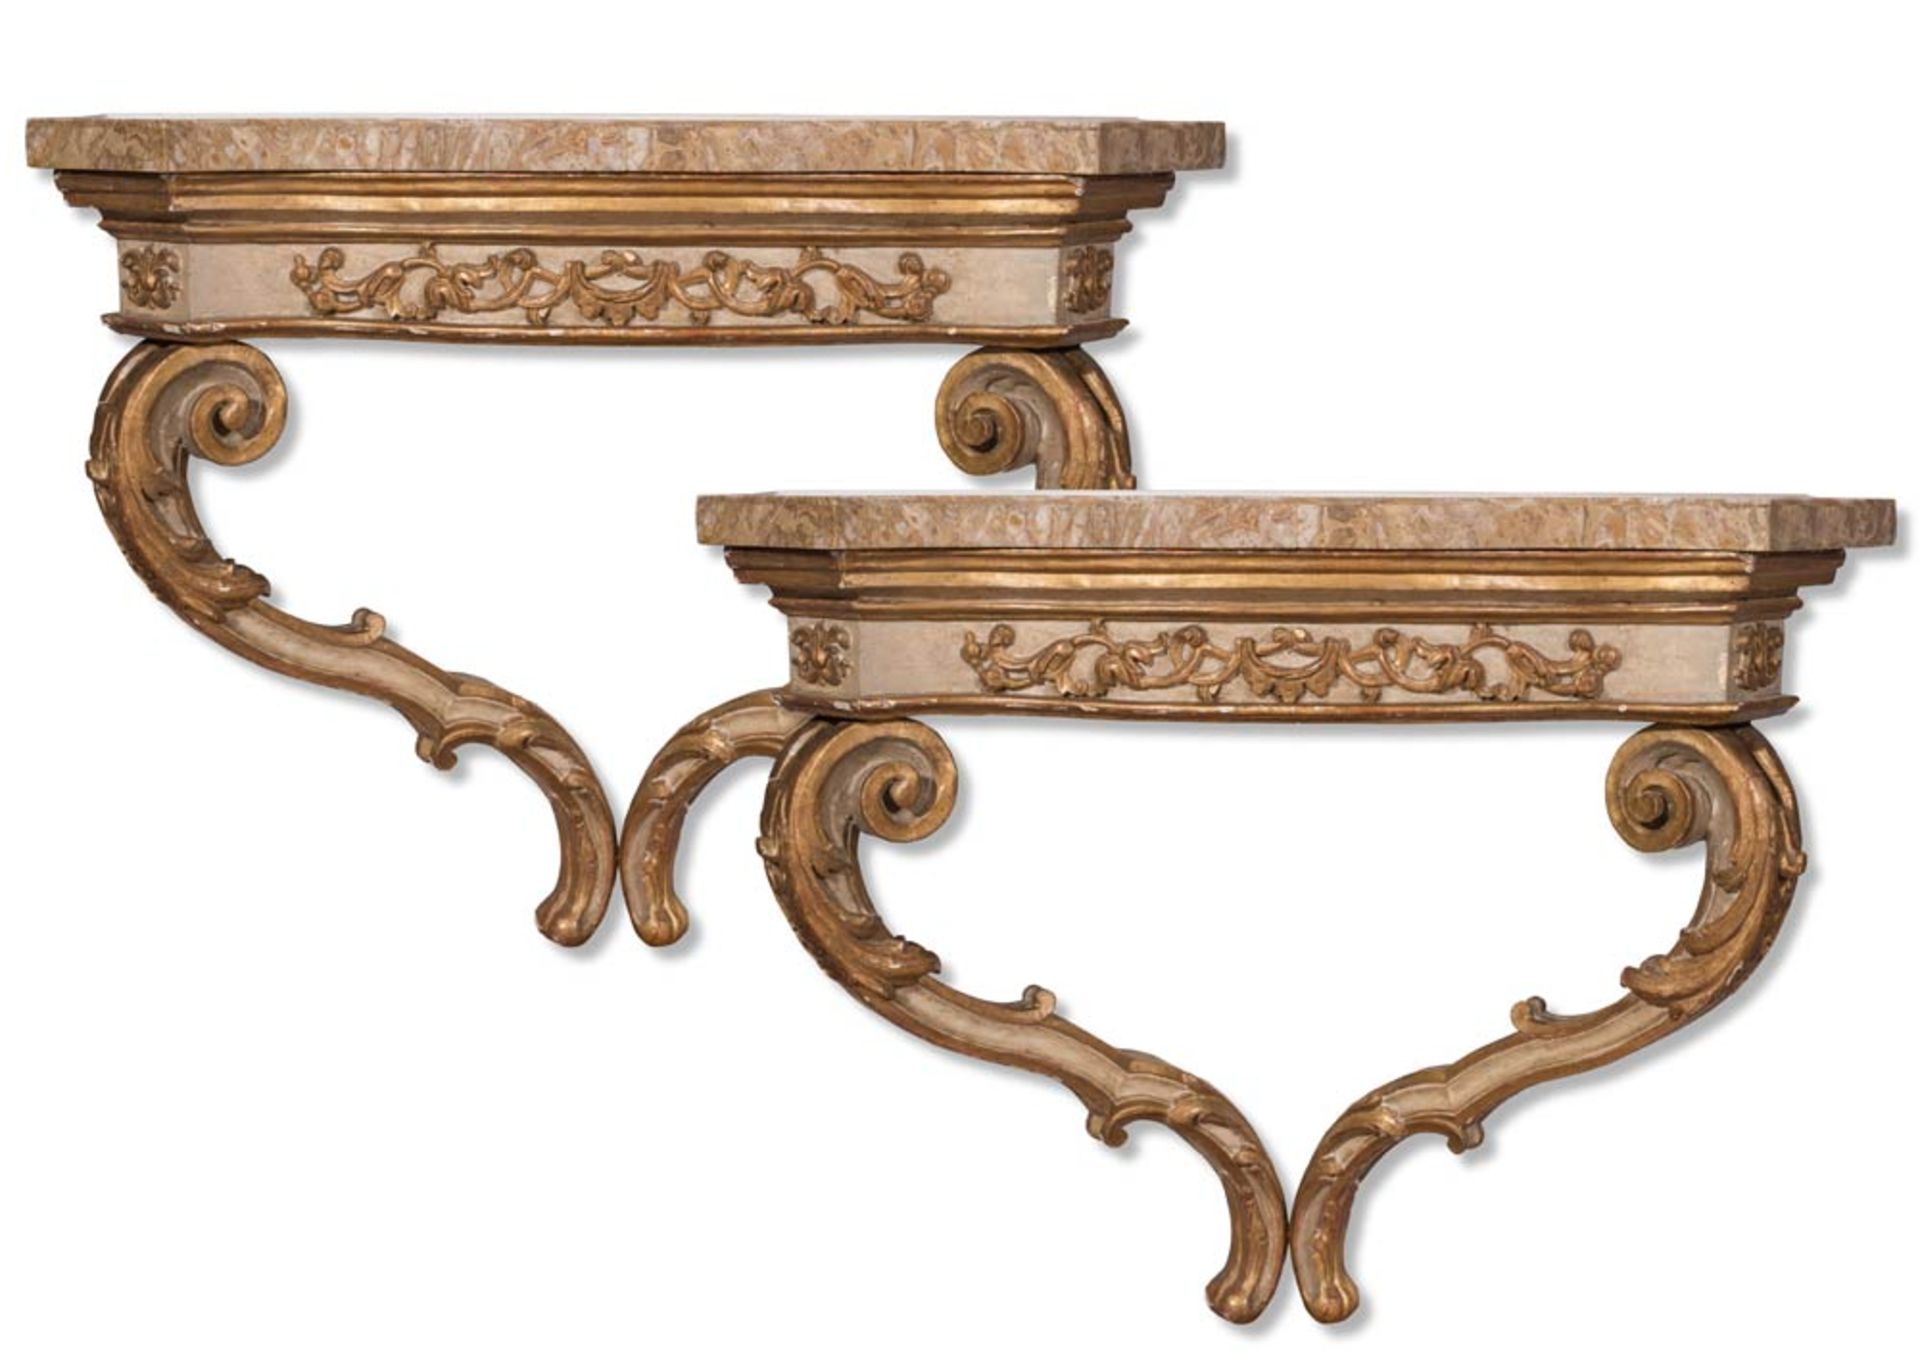 Pair of carved, lacquered and gilt wood consoles, Emilia, 19th Century.